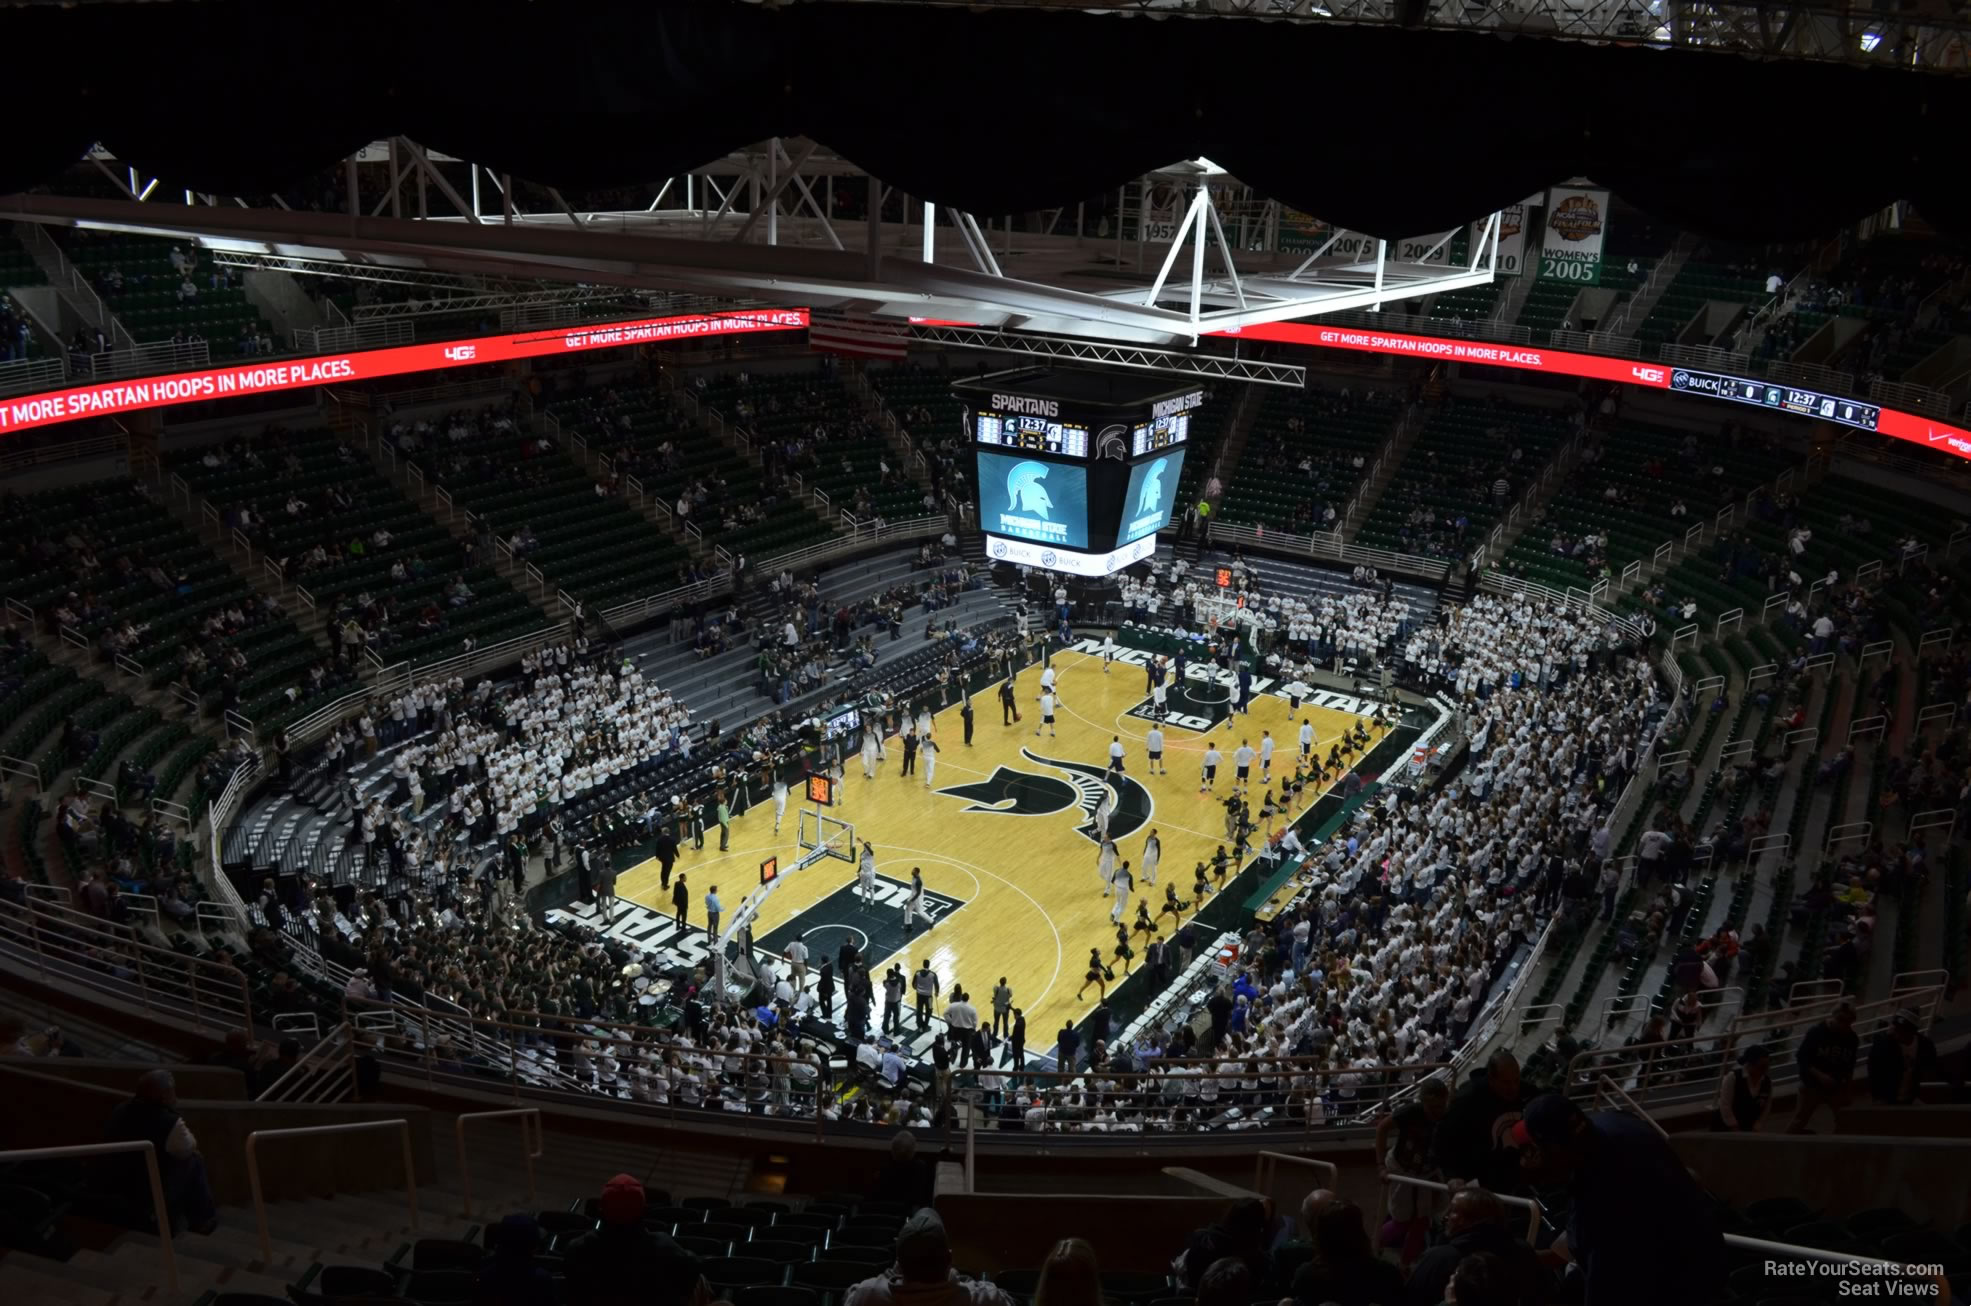 section 215, row 15 seat view  - breslin center